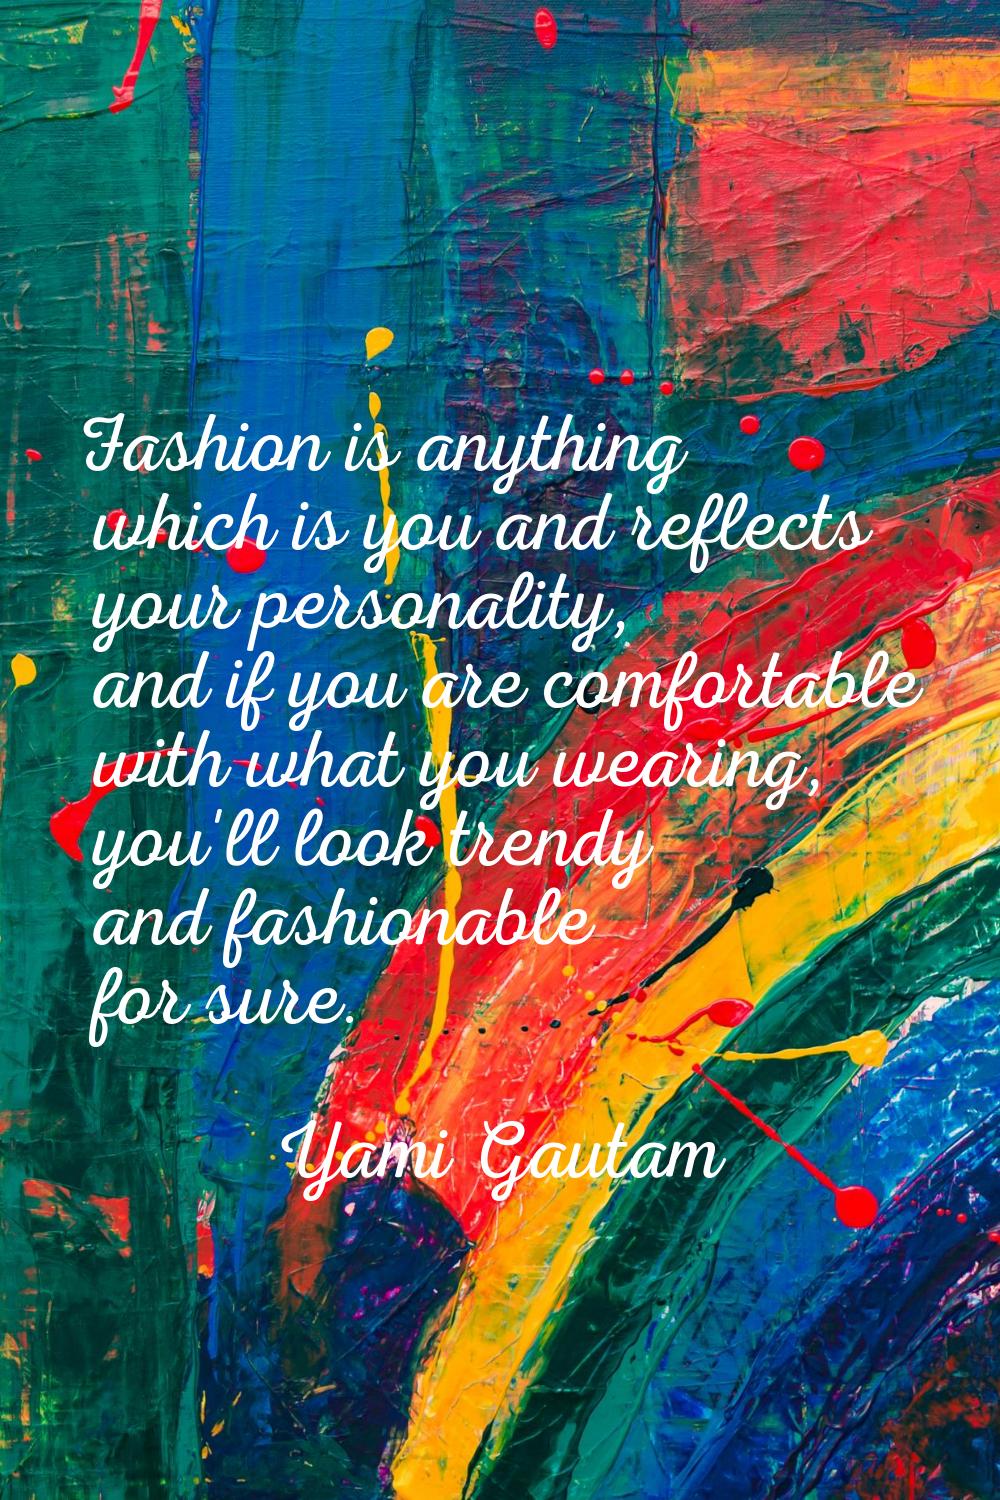 Fashion is anything which is you and reflects your personality, and if you are comfortable with wha